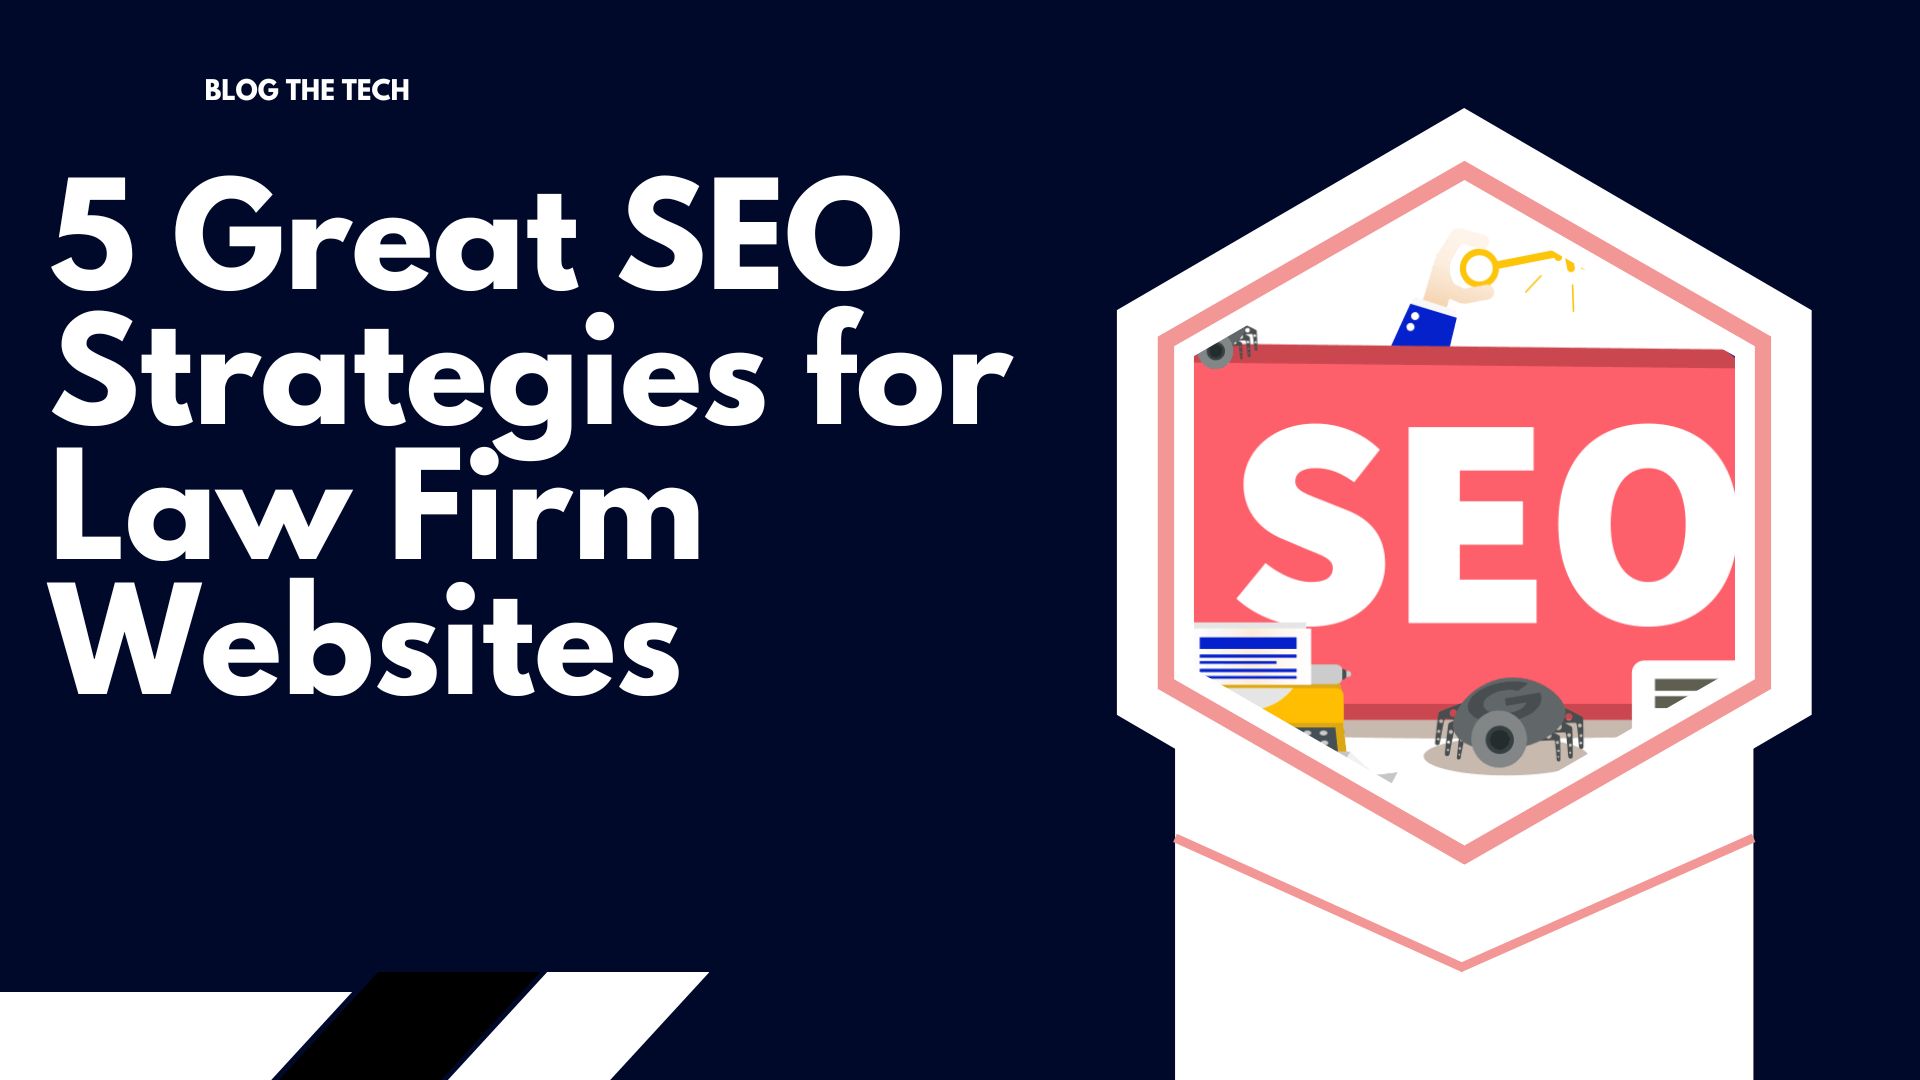 SEO Strategies for Law Firm Websites